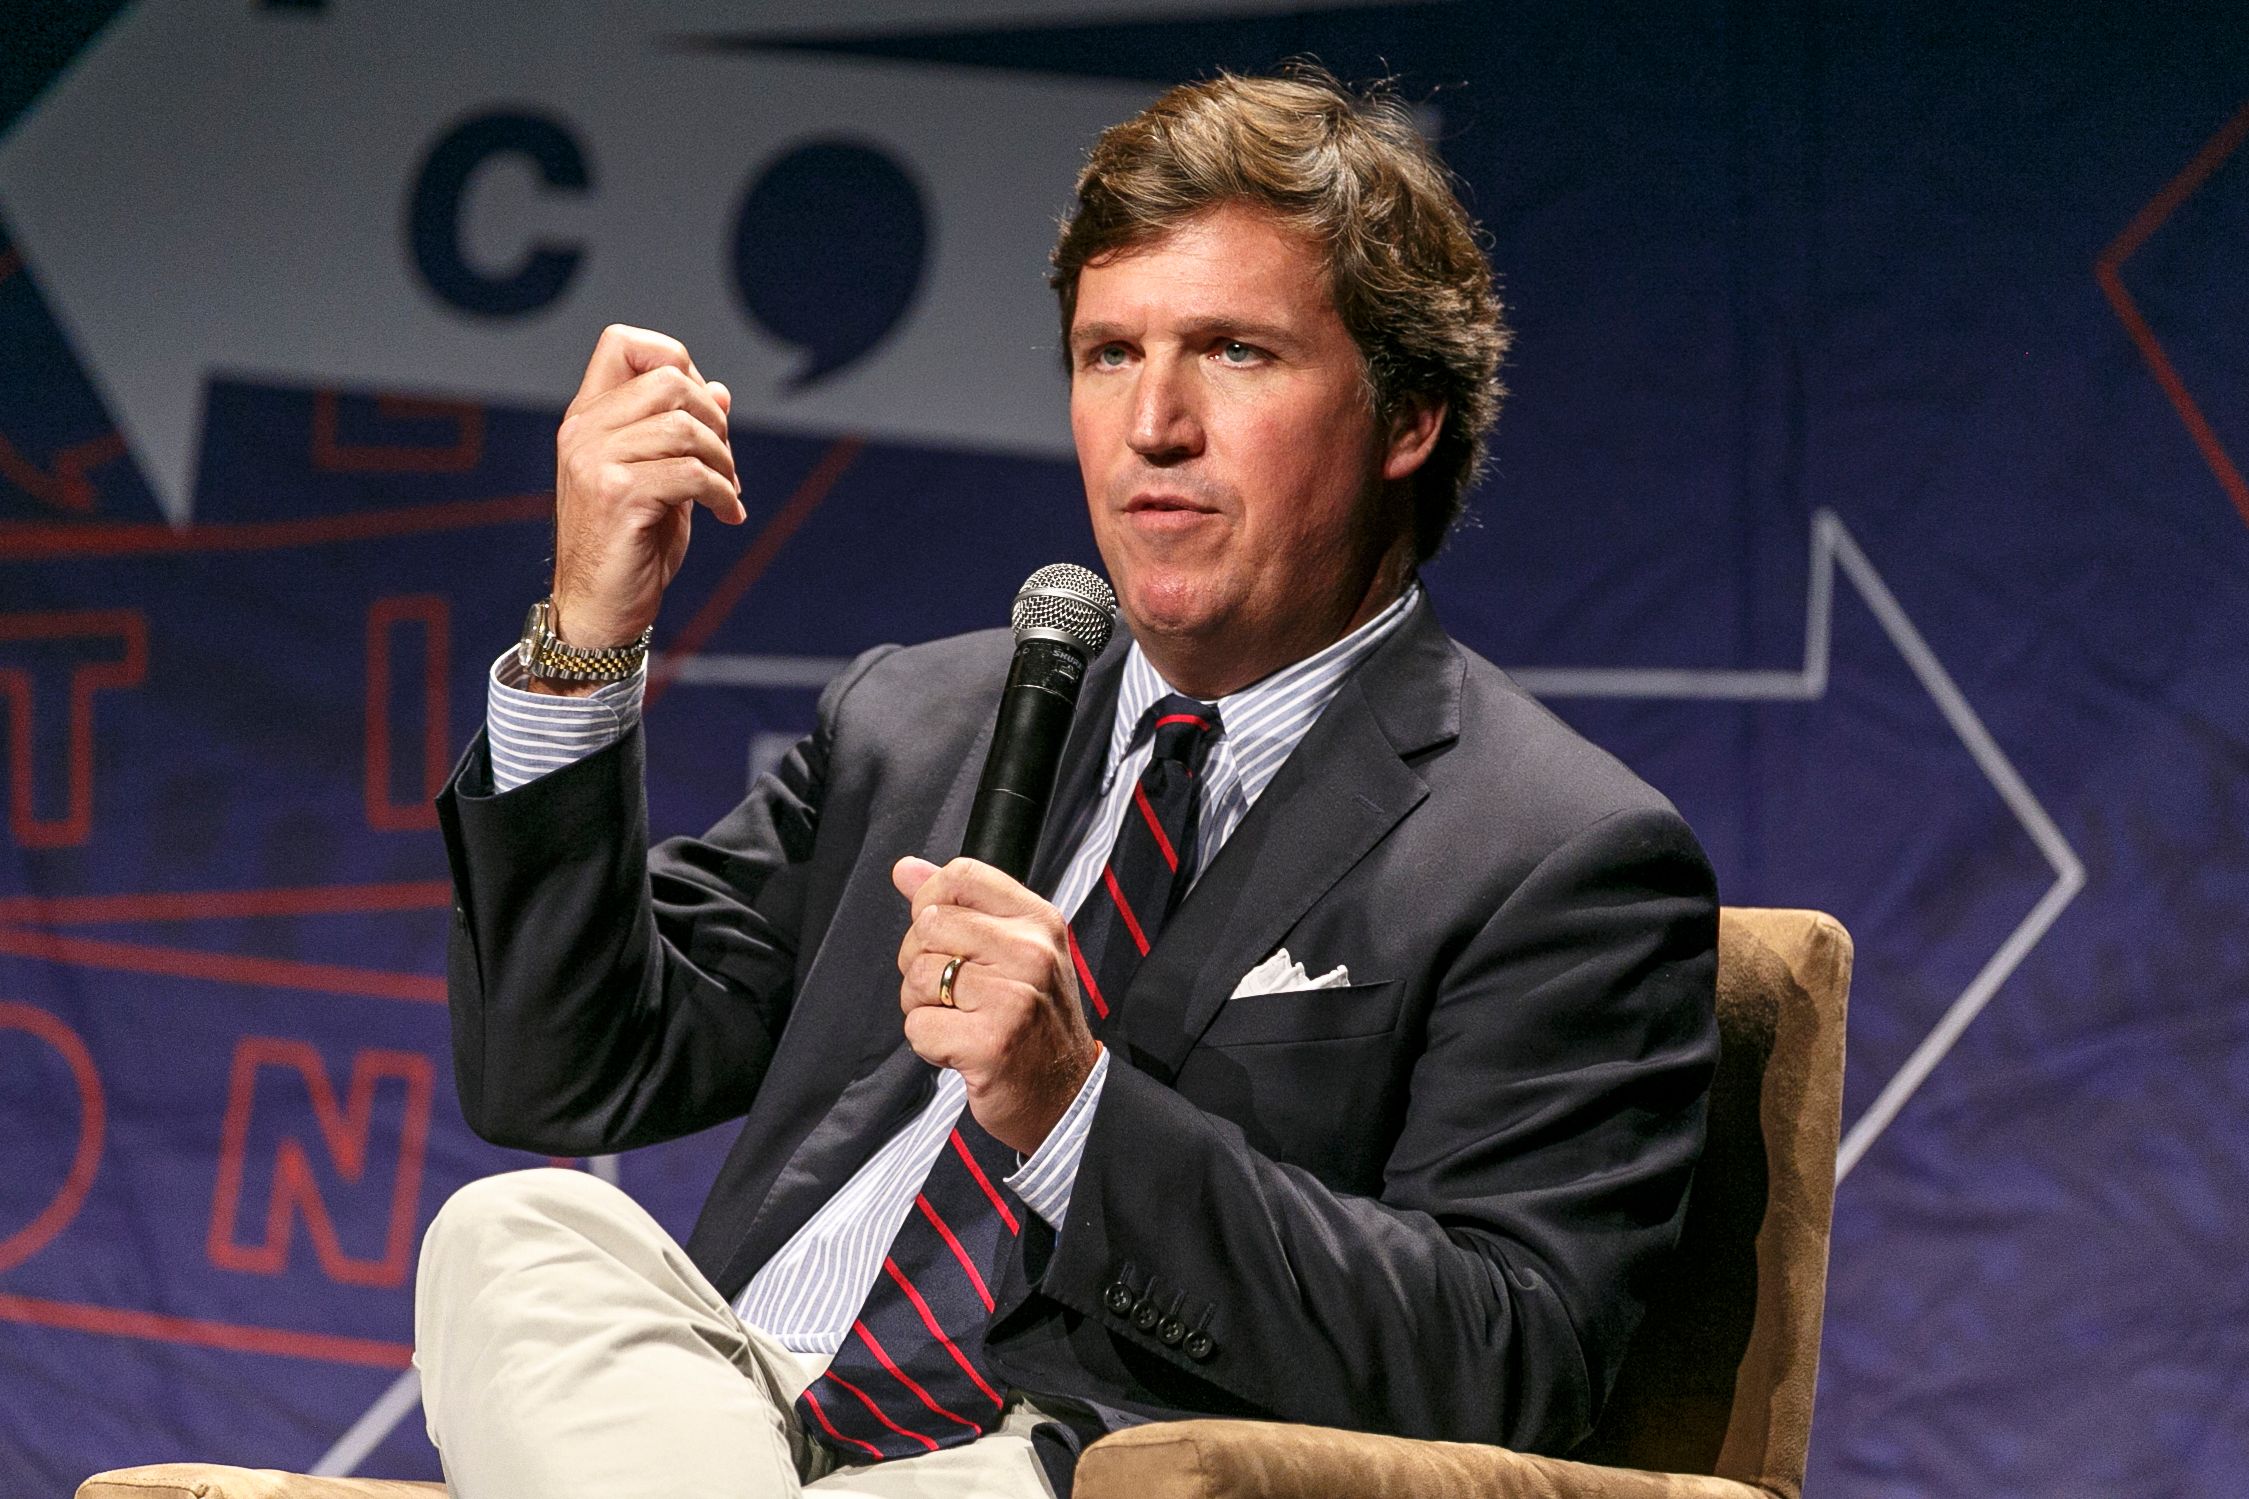 Tucker Carlson speaks at an event.